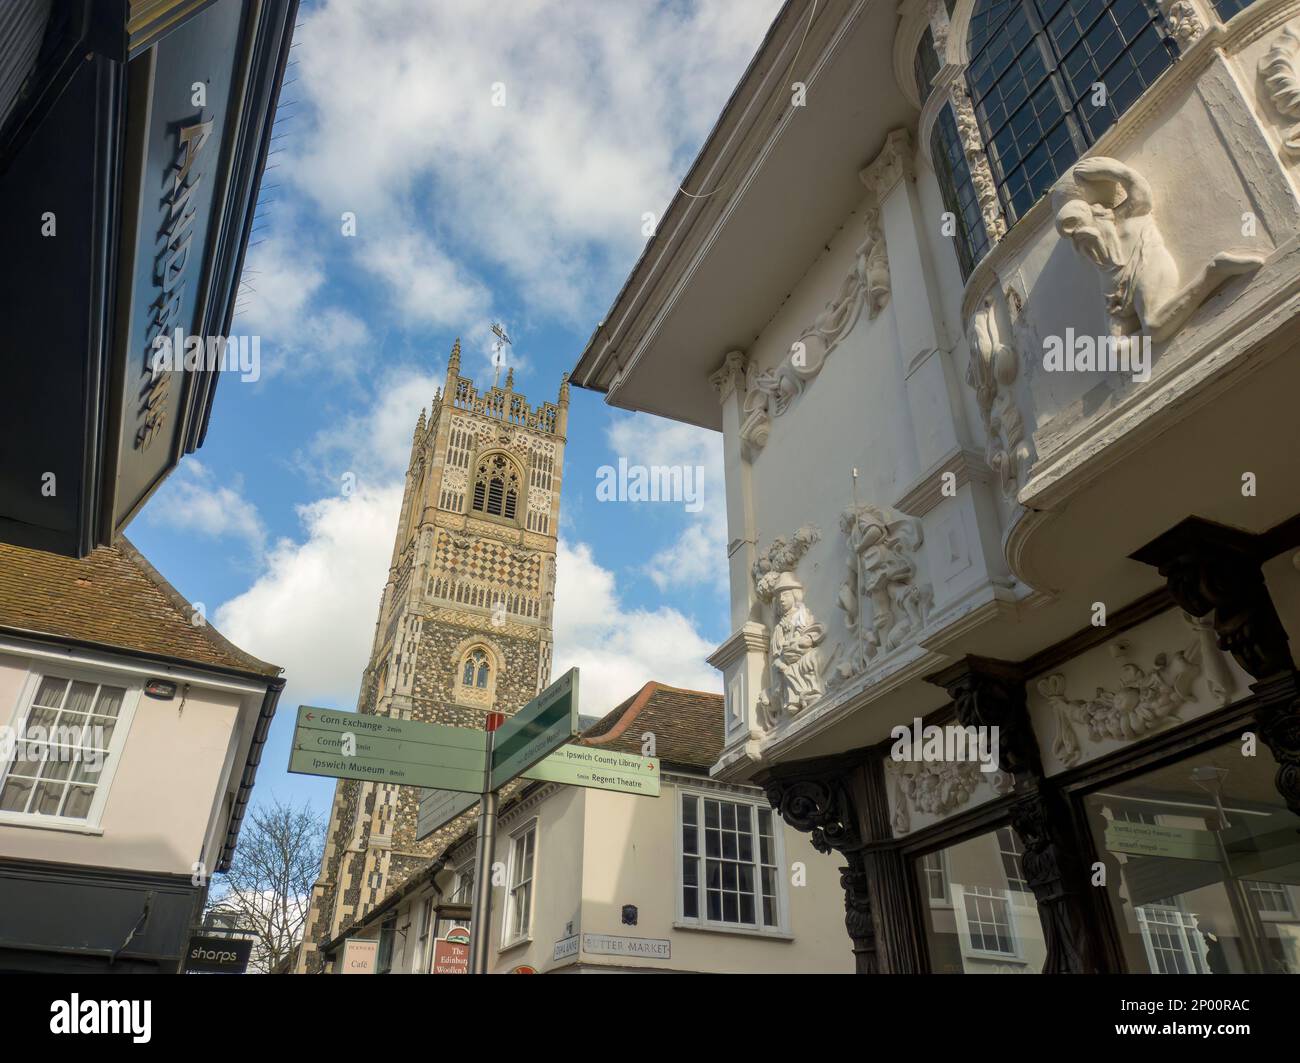 The tower of St Mary-le-Tower Church between the narrow streets of Ipswich, Suffolk, UK Stock Photo